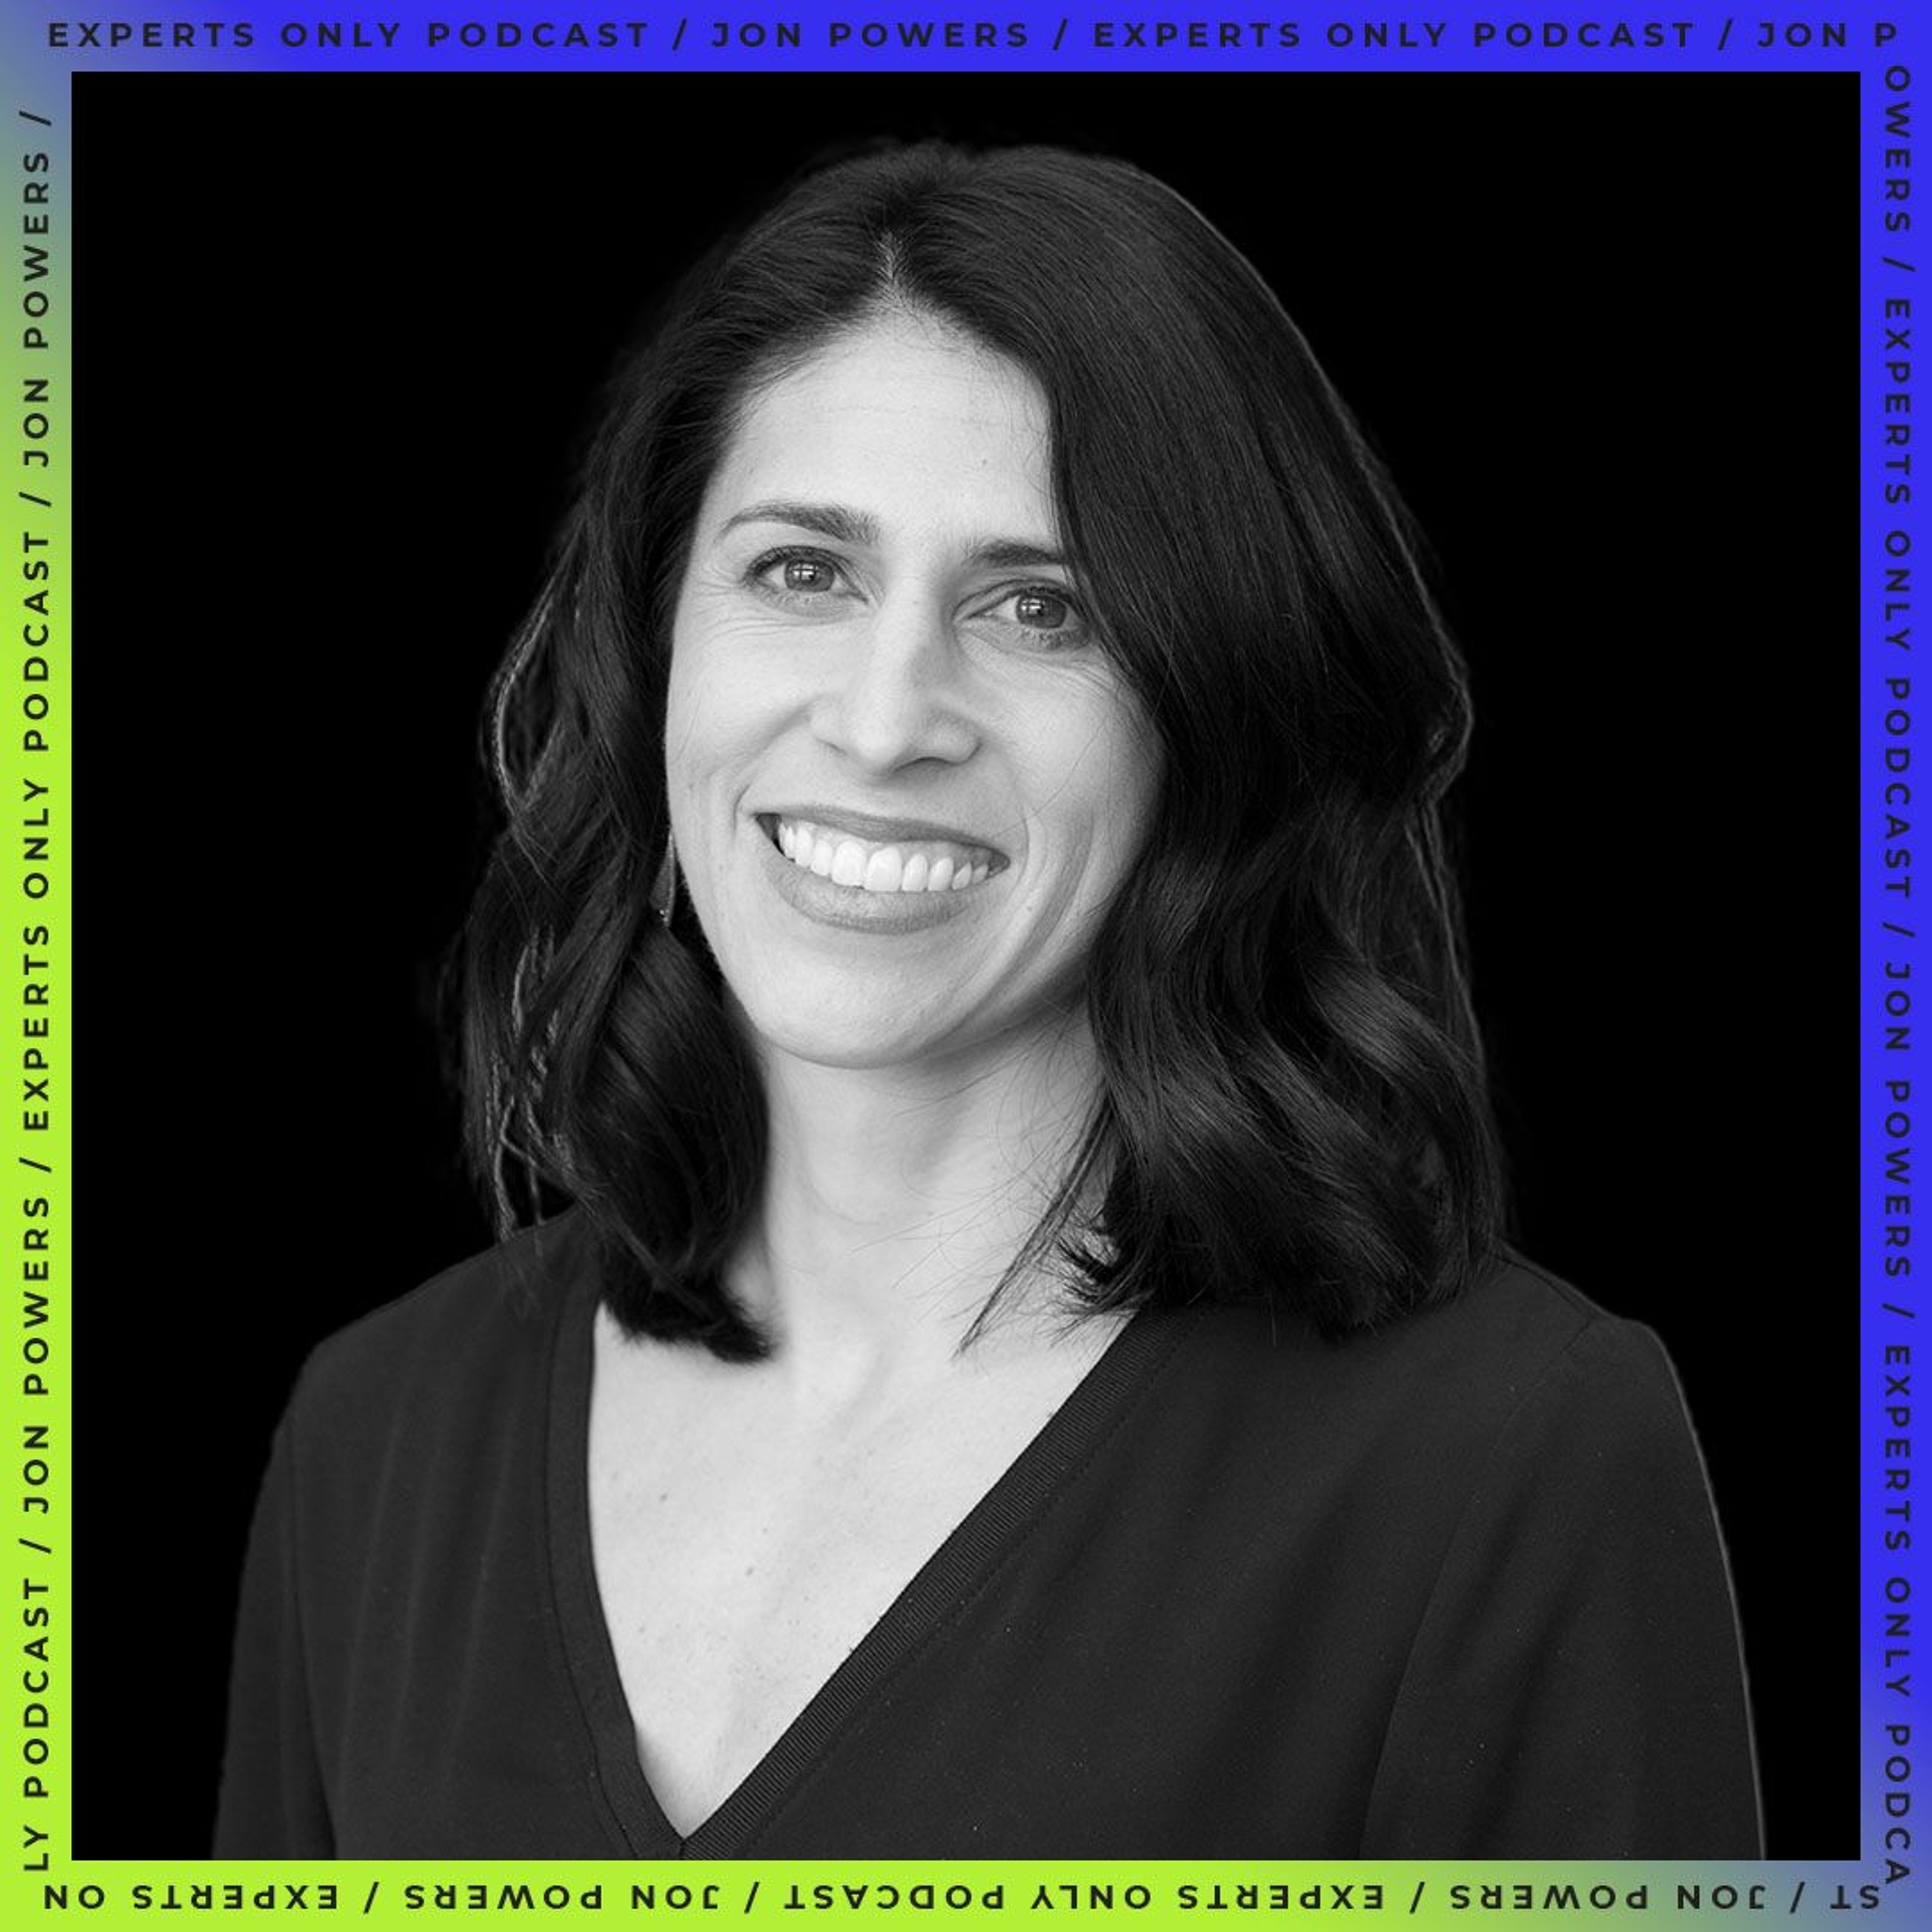 Podcast #108 with Kara Mangone, Global Head of Climate Strategy at Goldman Sachs